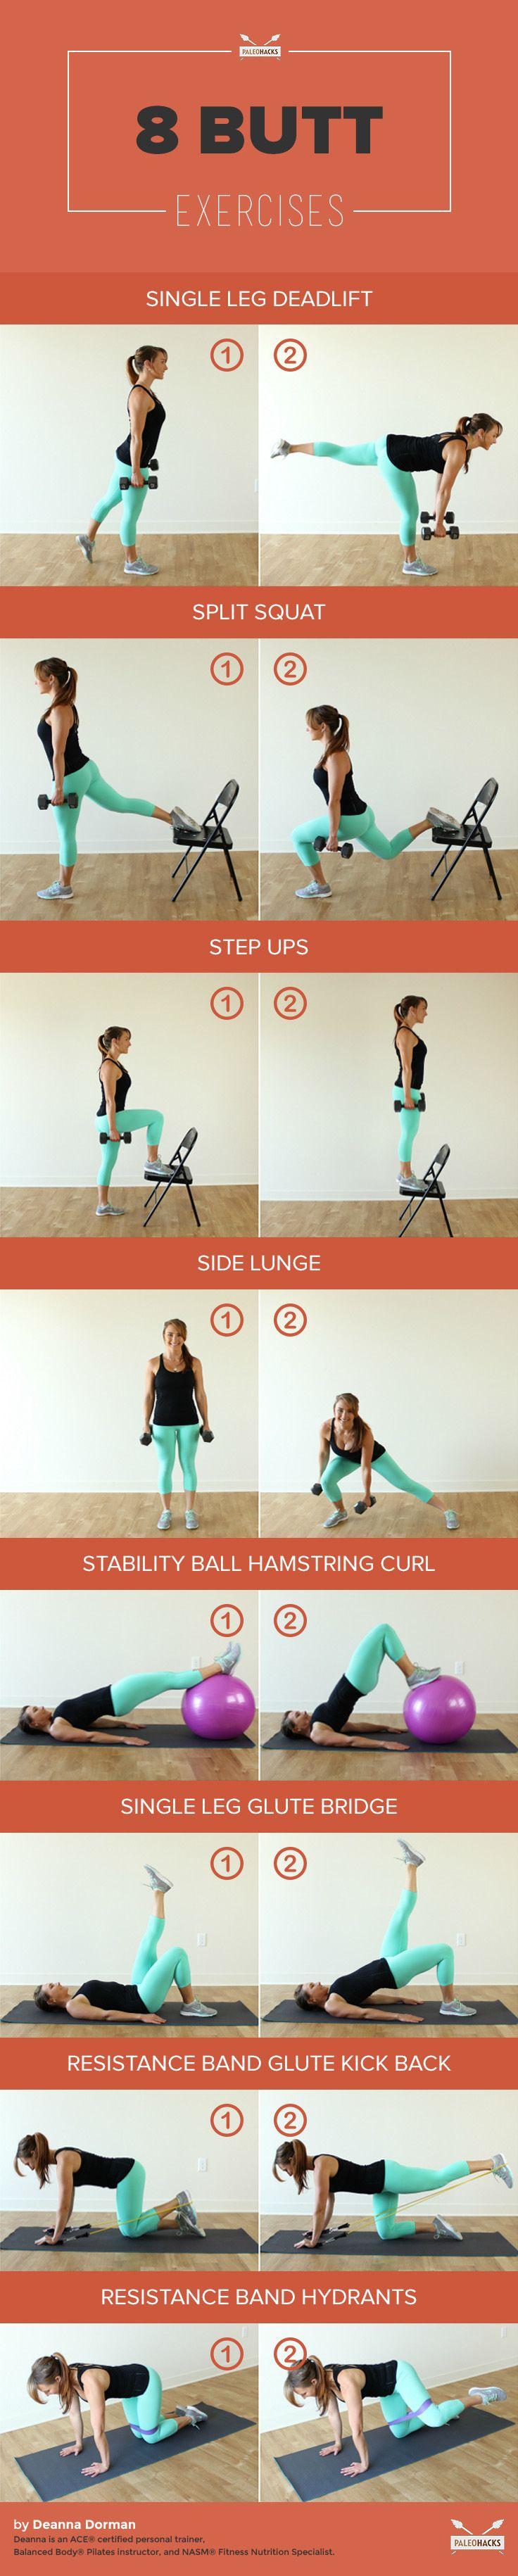 best of For butt legs Exercises and